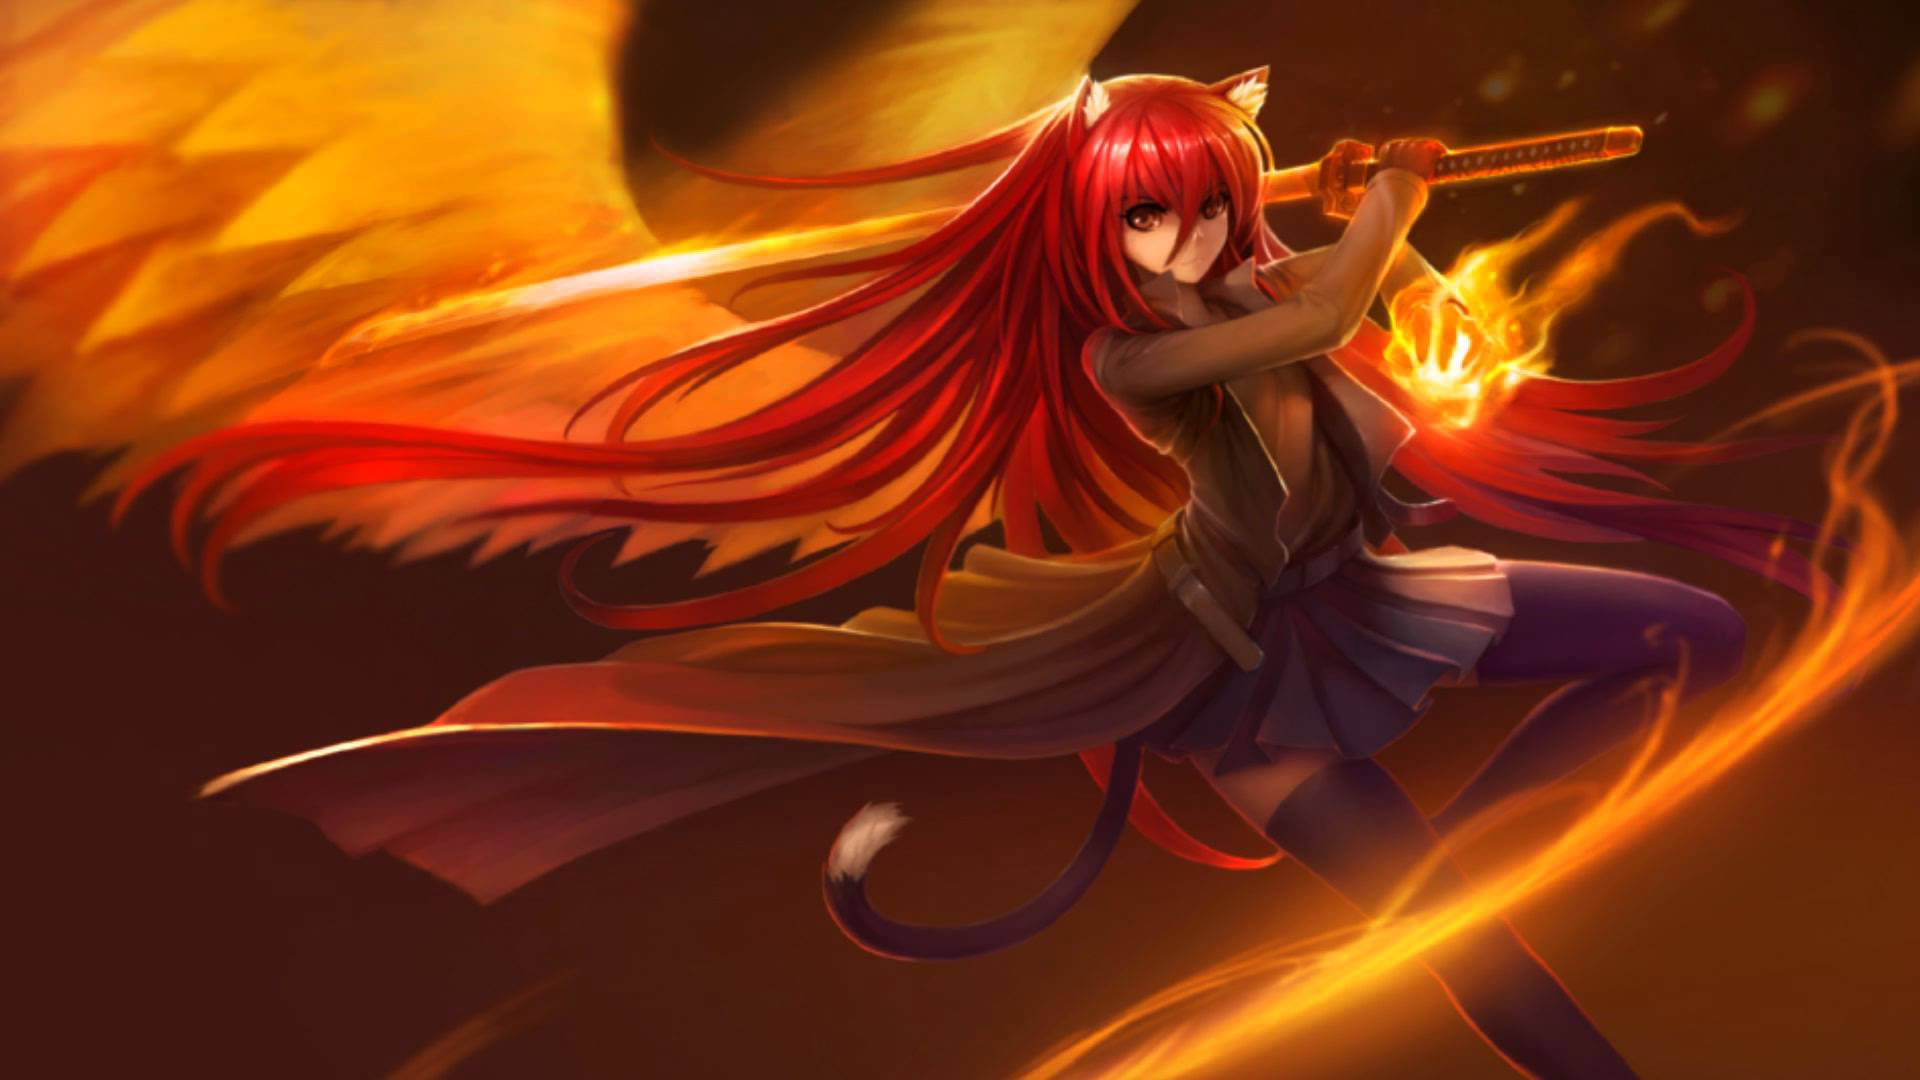 Cat Warrior Girl With Fire Wings Background